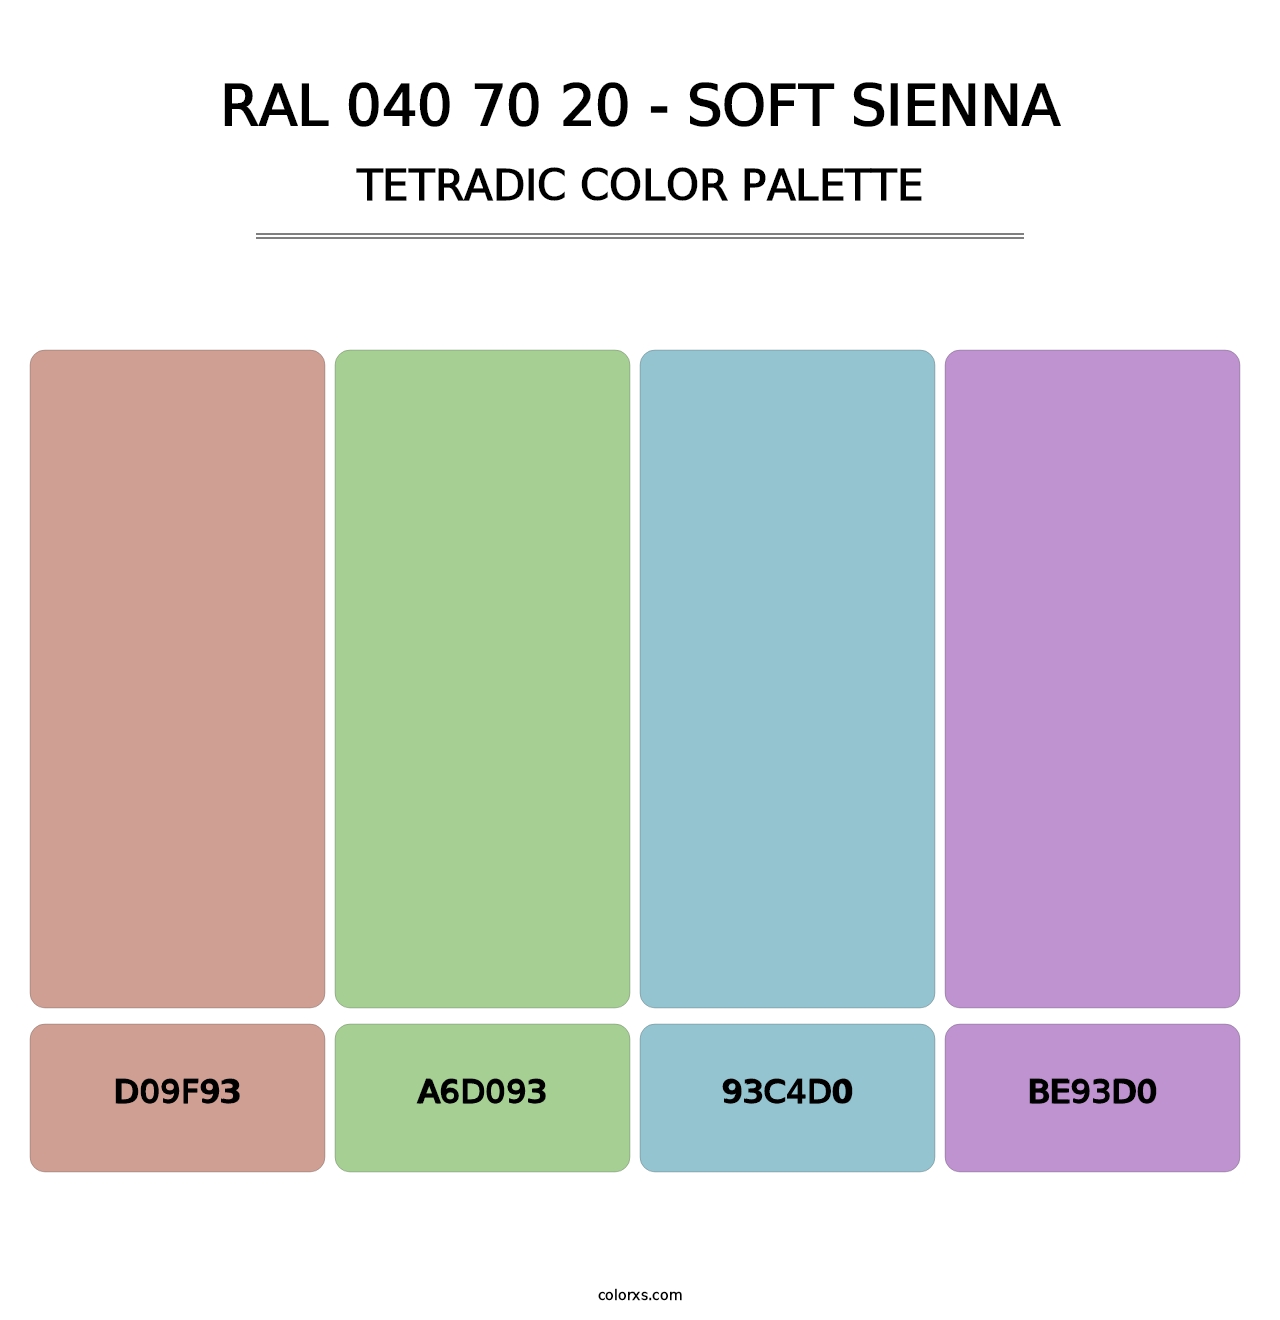 RAL 040 70 20 - Soft Sienna - Tetradic Color Palette